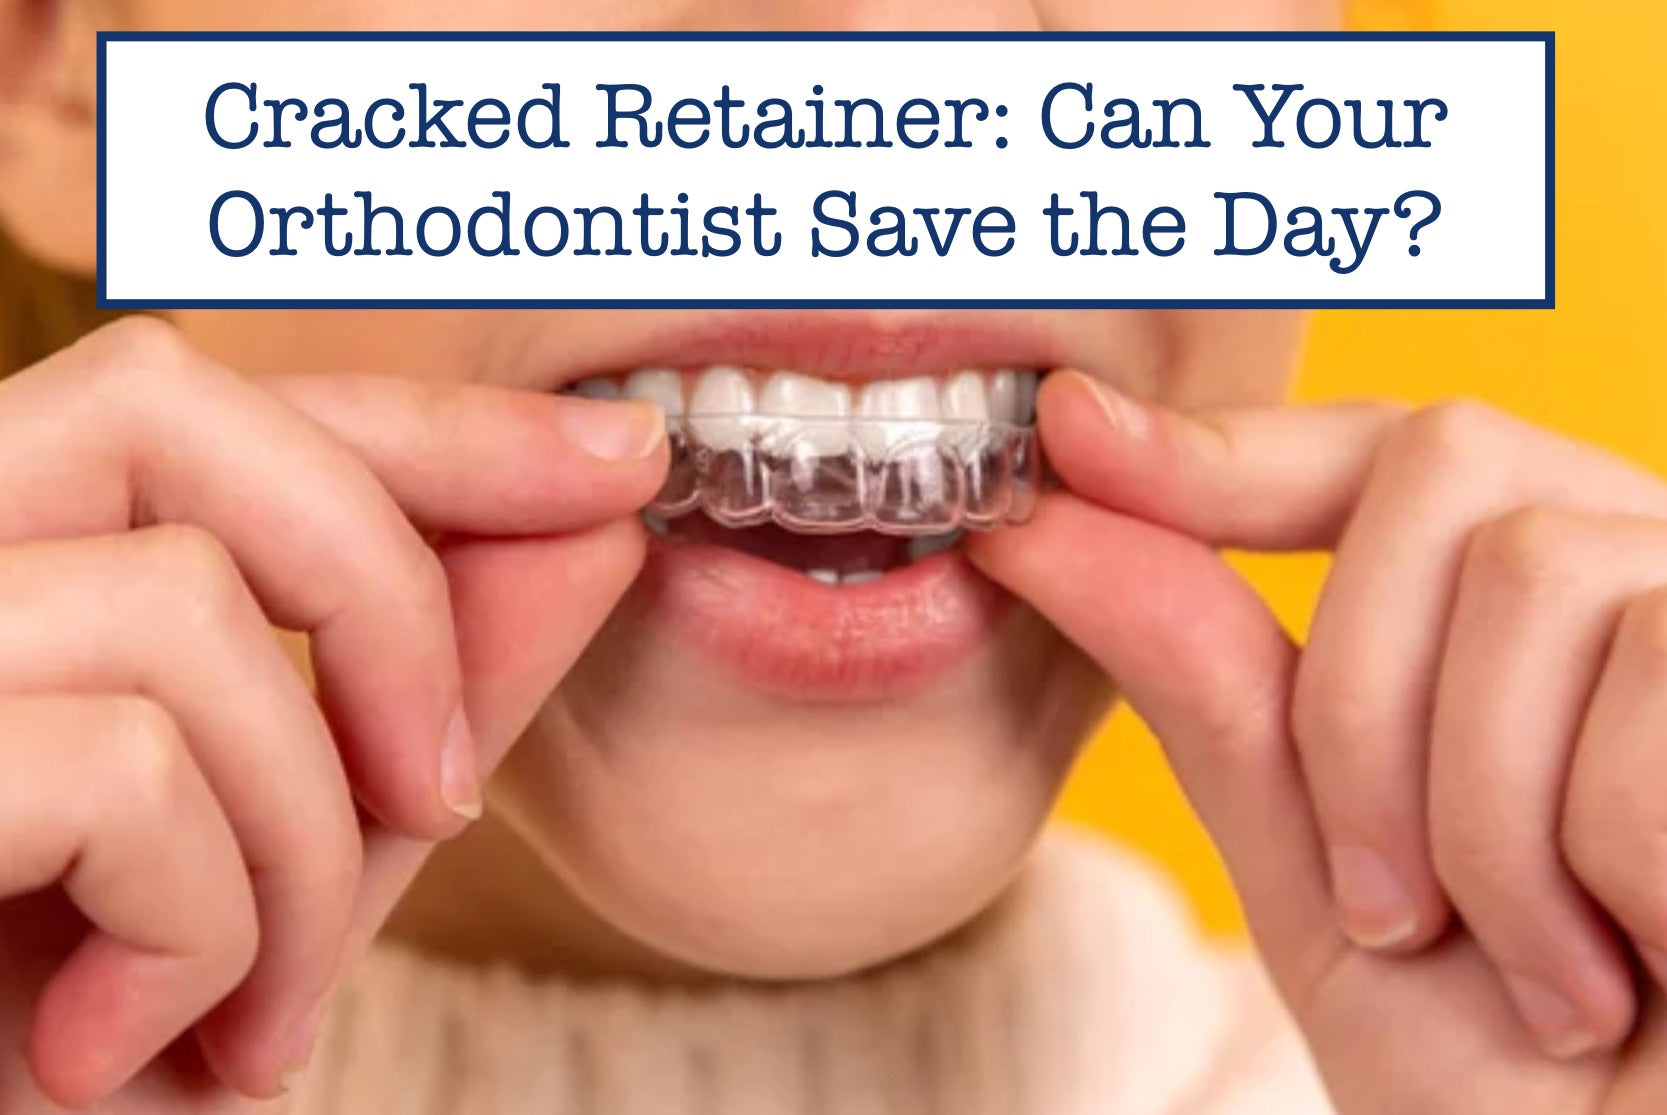 Cracked Retainer: Can Your Orthodontist Save the Day?